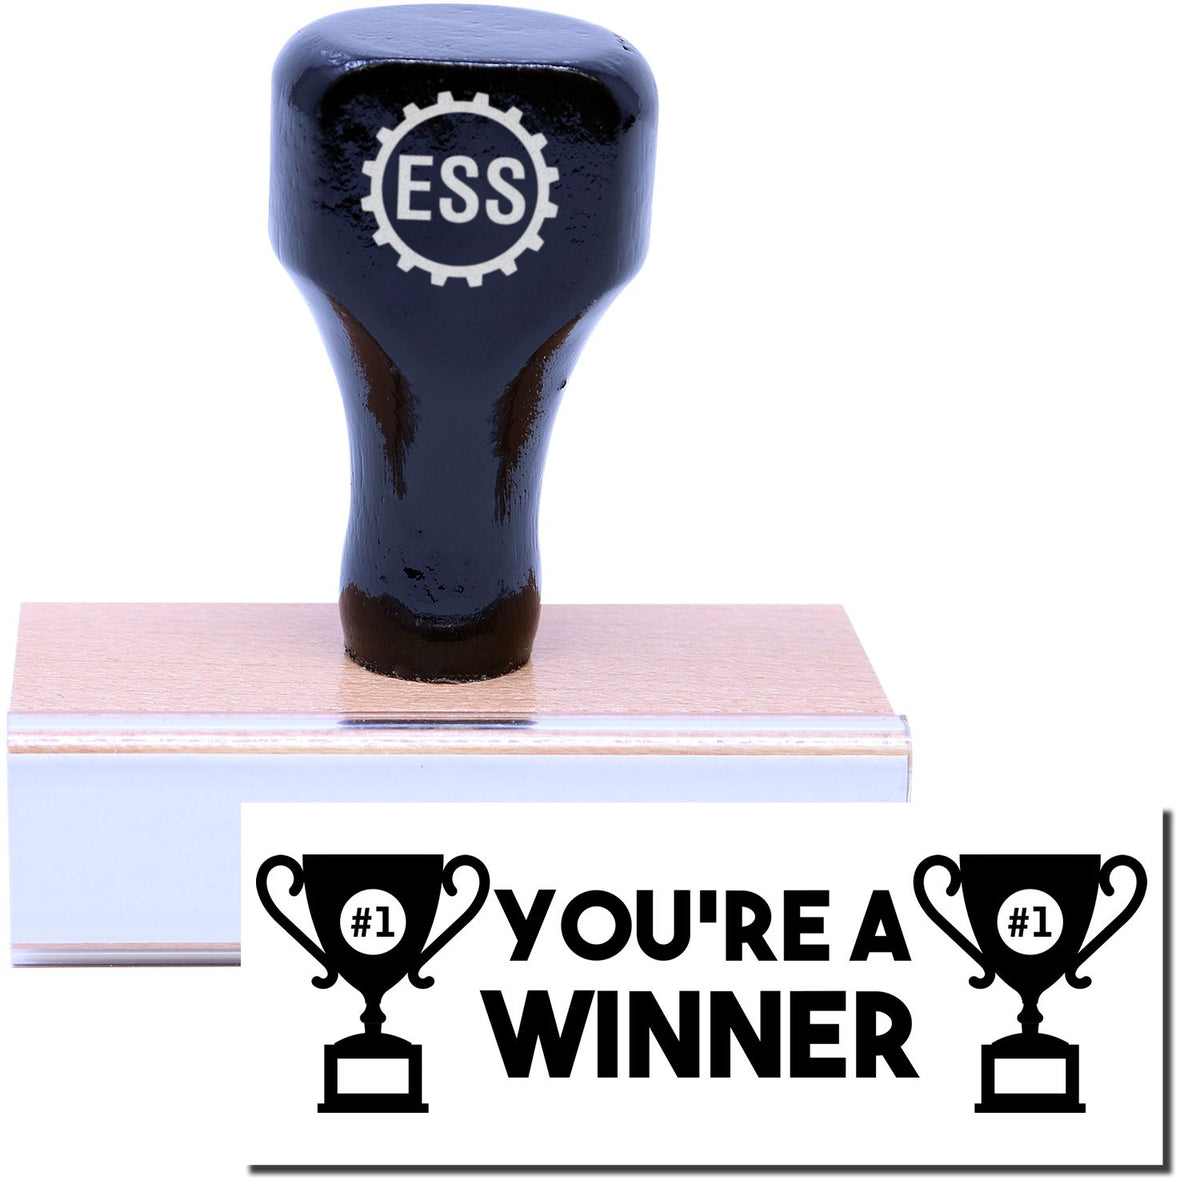 A stock office rubber stamp with a stamped image showing how the text &quot;YOU&#39;RE A WINNER&quot; in a large bold font with images of a trophy with #1 inside on each side of the text is displayed after stamping.